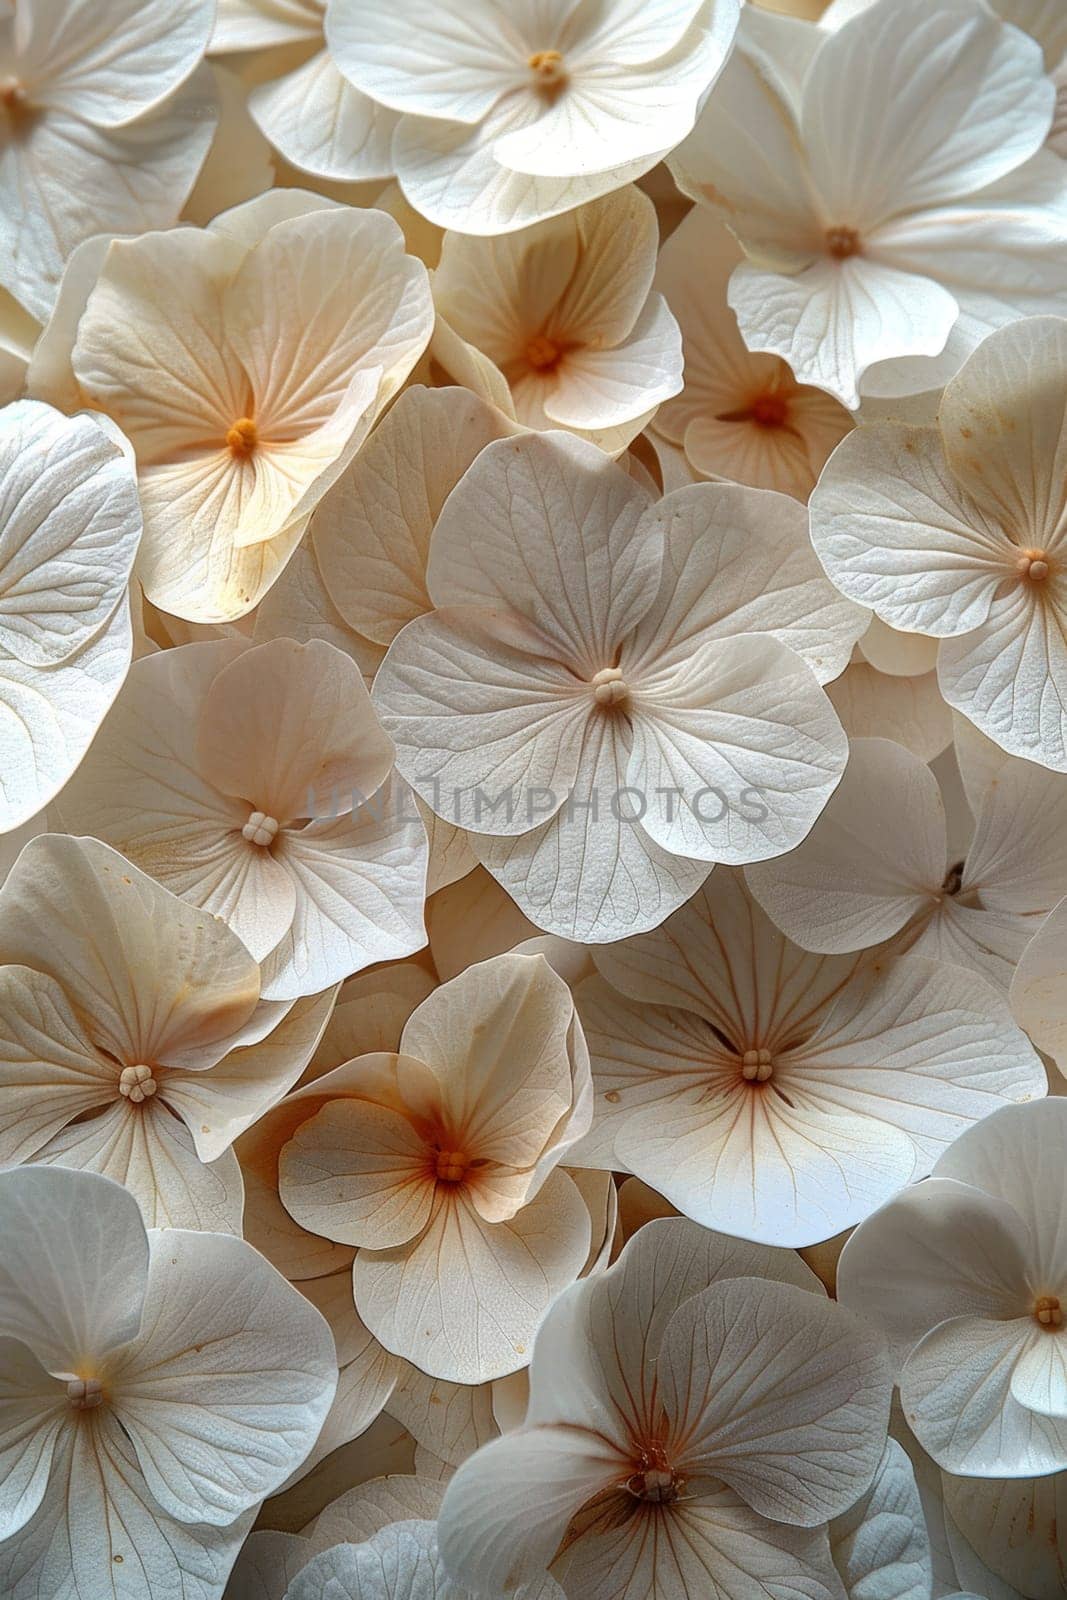 Abstract floral pattern of petals. Delicate background colors of flower petals.